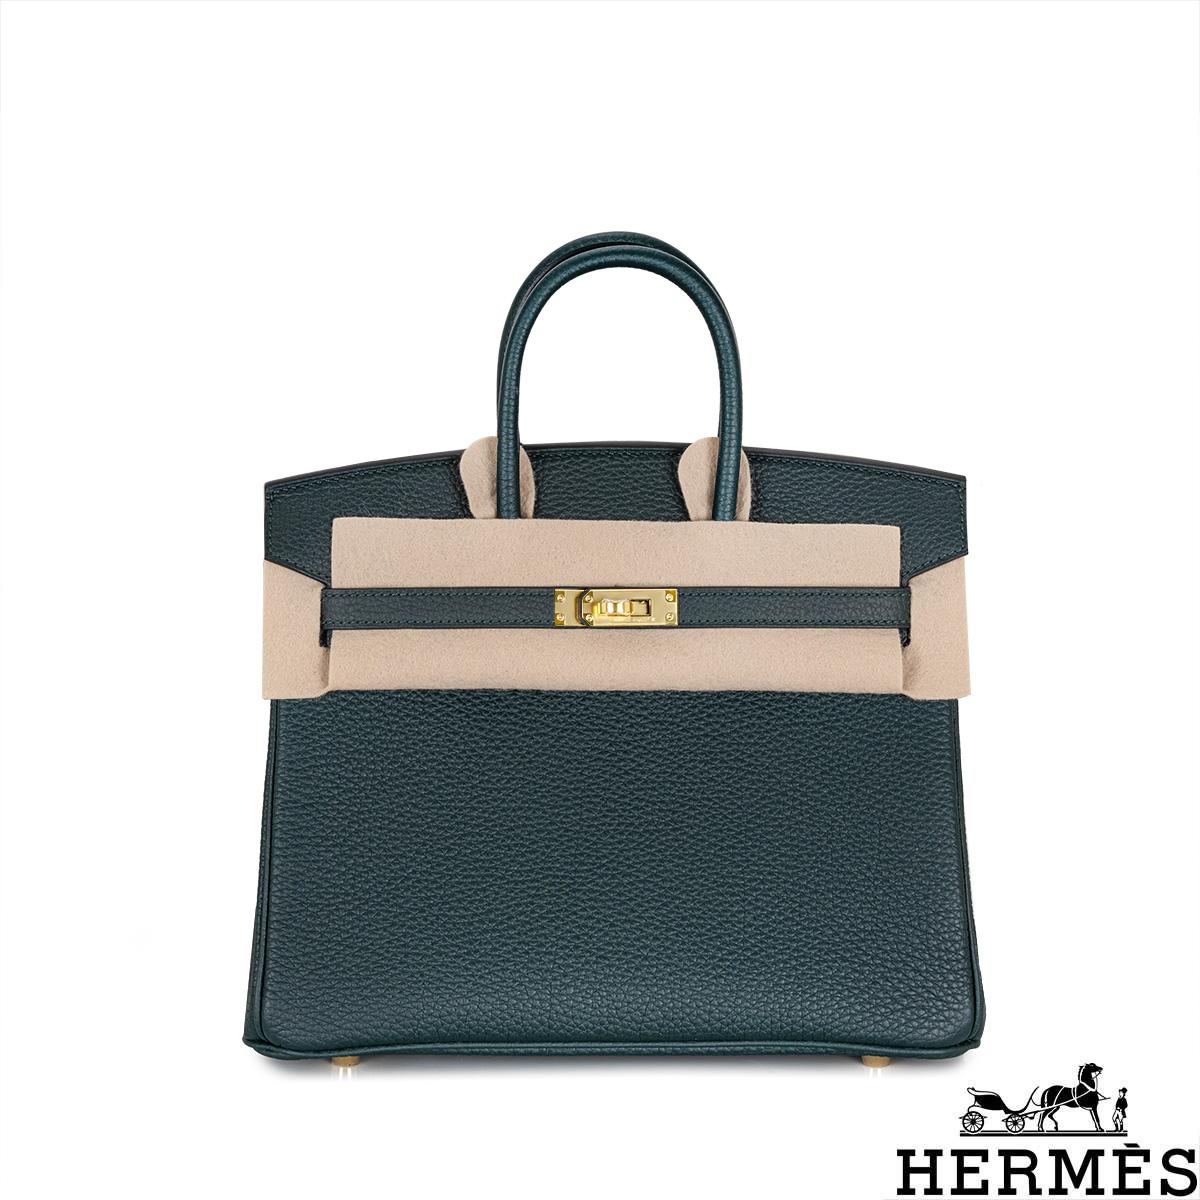 An amazing Hermès 25cm Birkin bag. The exterior of this Birkin is in Vert Cypress Togo leather with tonal stitching. It features gold tone hardware with two straps and a front toggle closure. The interior features a zip pocket with an Hermès